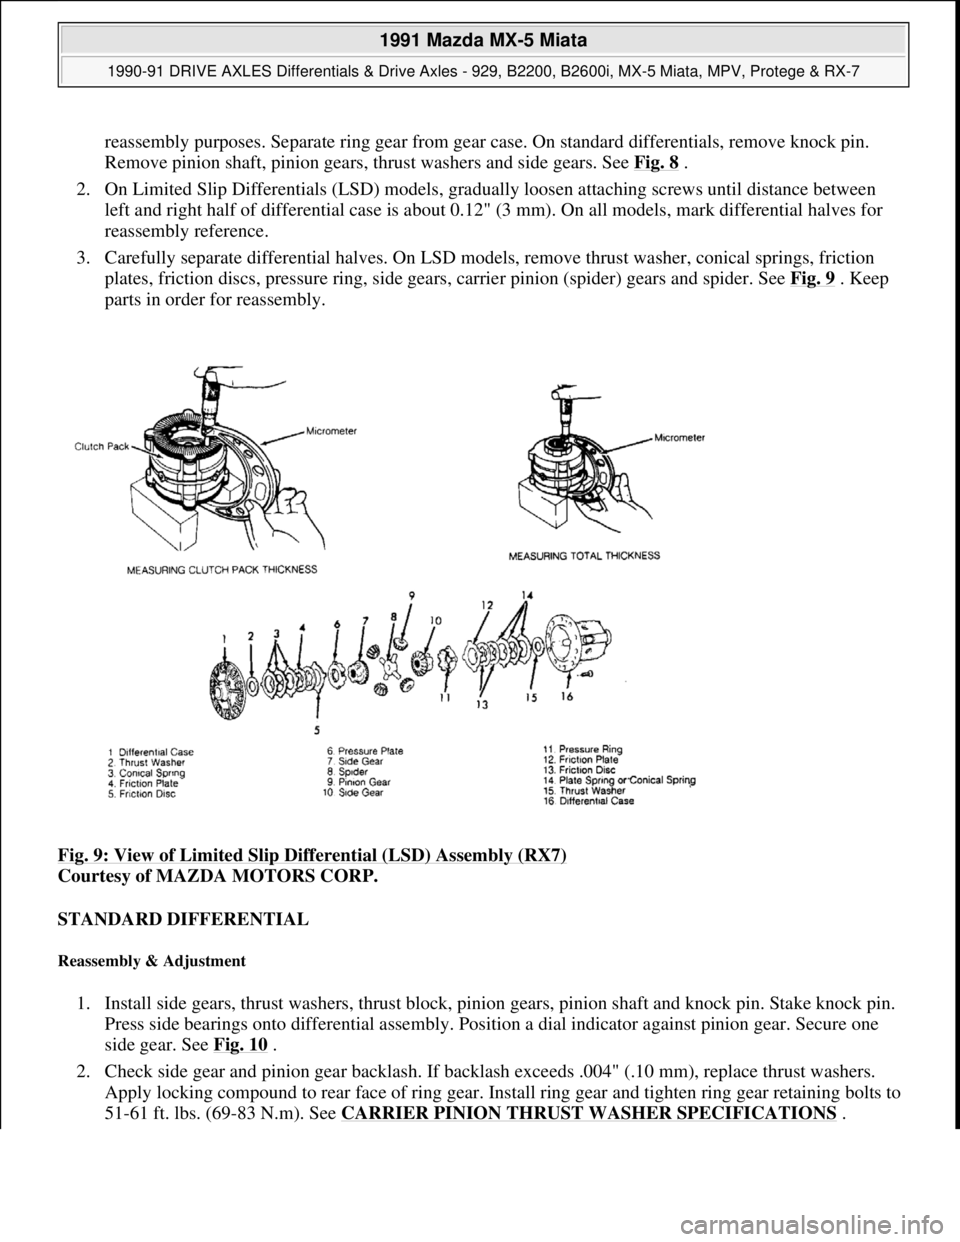 MAZDA MIATA 1991  Factory Service Manual reassembly purposes. Separate ring gear from gear case. On standard differentials, remove knock pin. 
Remove pinion shaft, pinion gears, thrust washers and side gears. See Fig. 8
 .  
2. On Limited Sl